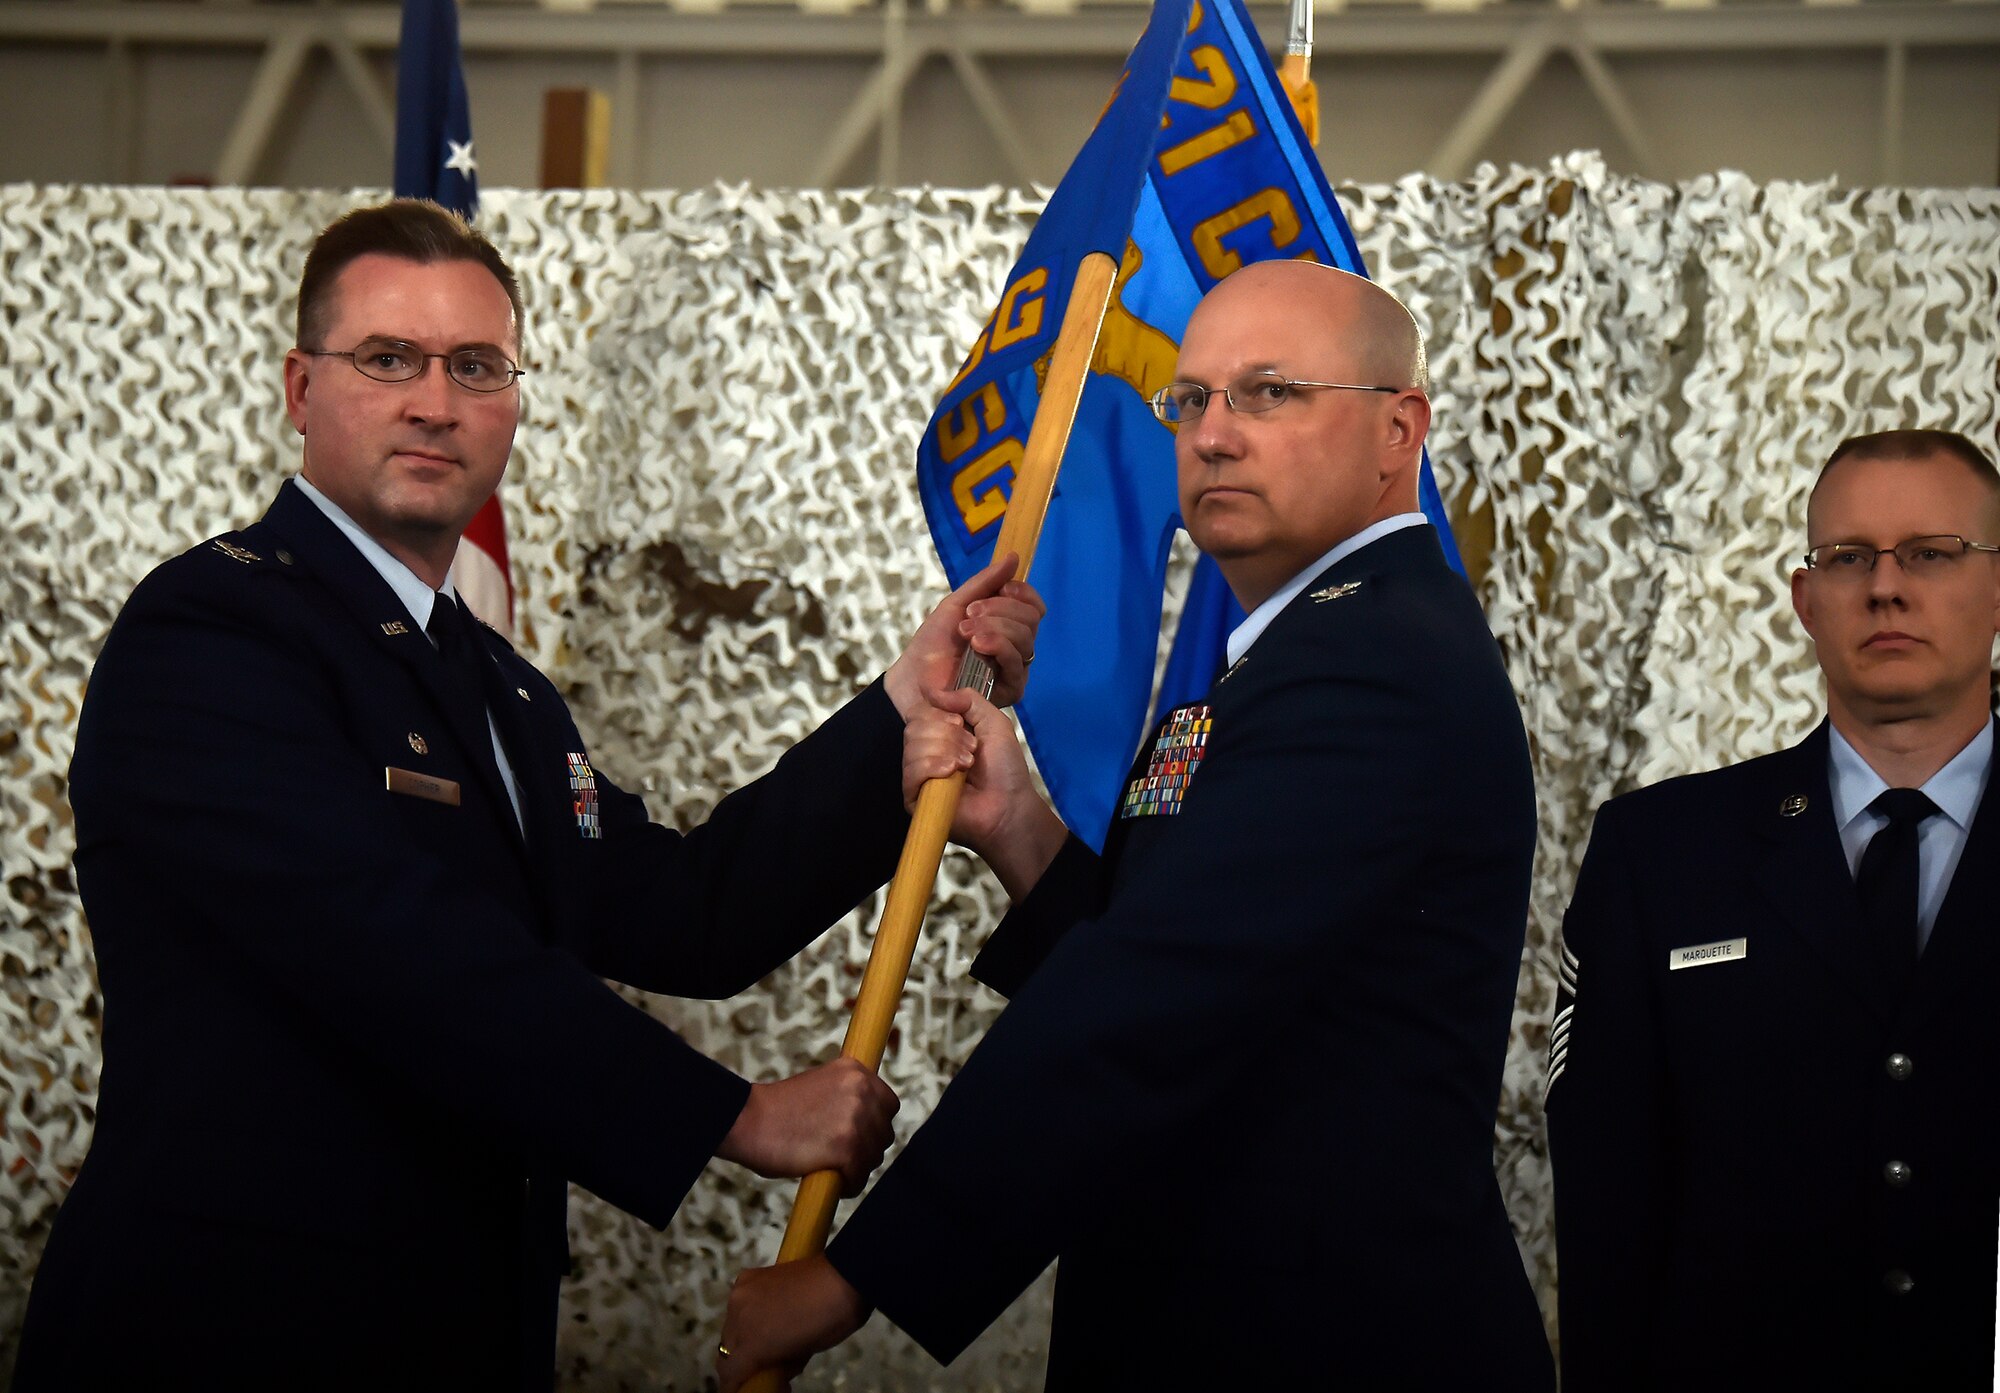 Col. Robert Levin, right, commander of the 621st Contingency Operations Support Group, relinquishes command of the inactivated 621 COSG to Col. James Copher, 621st Contingency Response Wing commander, during the 621 CRW reorganization capstone ceremony at Joint Base McGuire-Dix-Lakehurst, N.J., June 26, 2015. The inactivation signified the completion of the wing’s restructuring initiative to enhance the effectiveness and efficiency of its global air mobility operations. (U.S. Air Force photo by Tech. Sgt. Matthew Hannen)